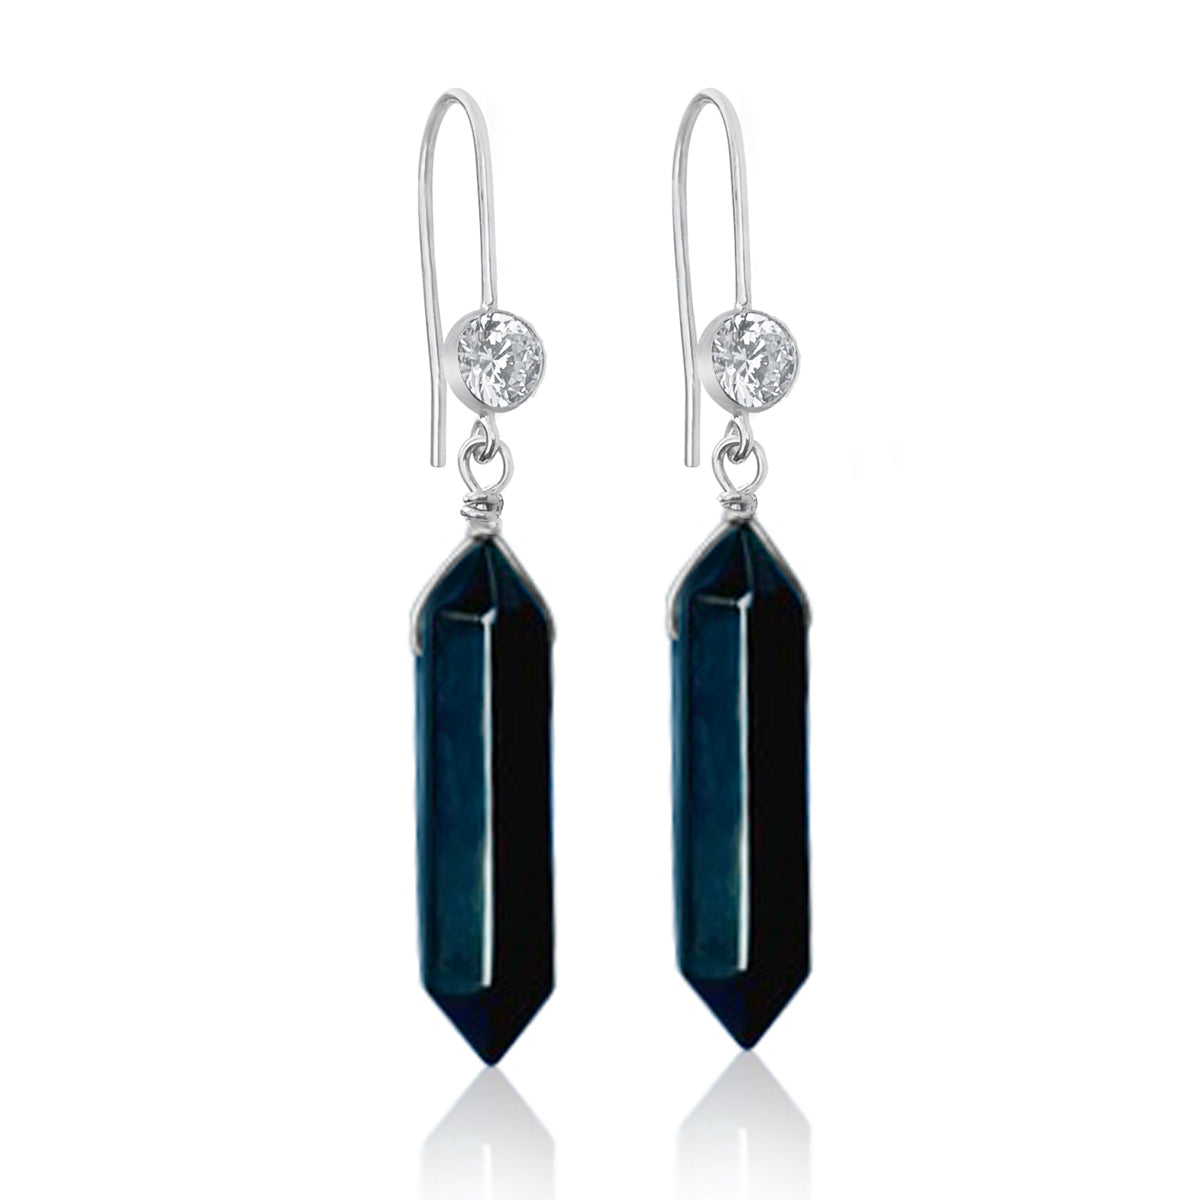 The Obsidian Shield Earrings are a striking pair of earrings that feature two polished Obsidian stones. Obsidian is a naturally occurring volcanic glass that is known for its protective properties. It is believed to shield against negative energy, providing a sense of safety and security.